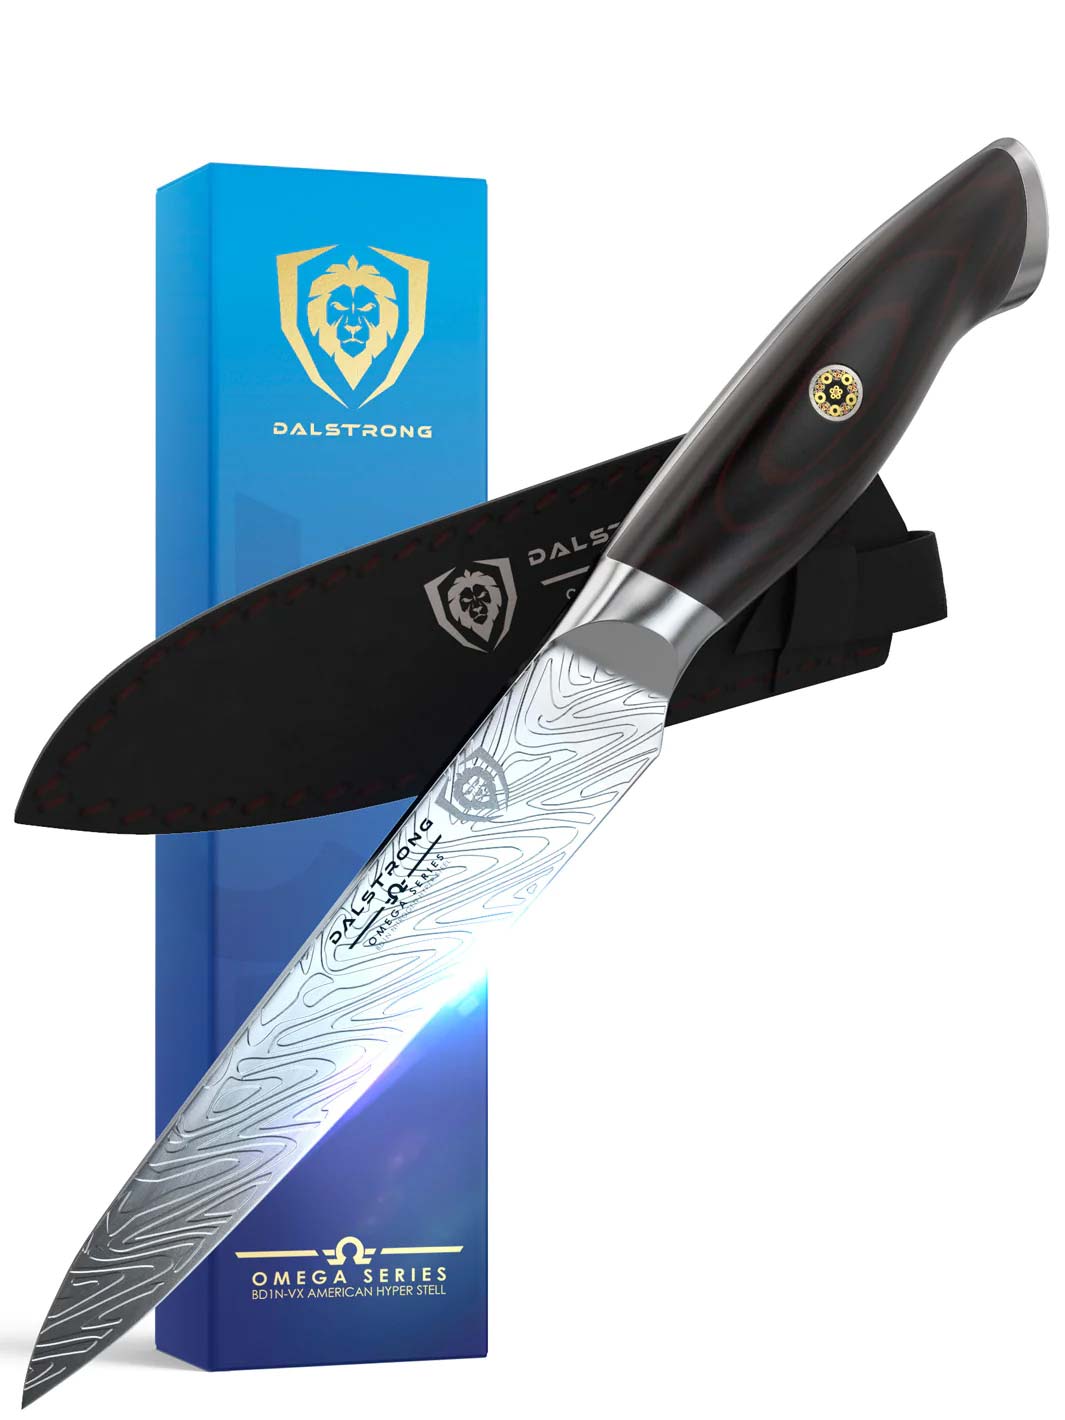 Dalstrong omega series 5.5 inch utility knife in front of it's premium packaging.